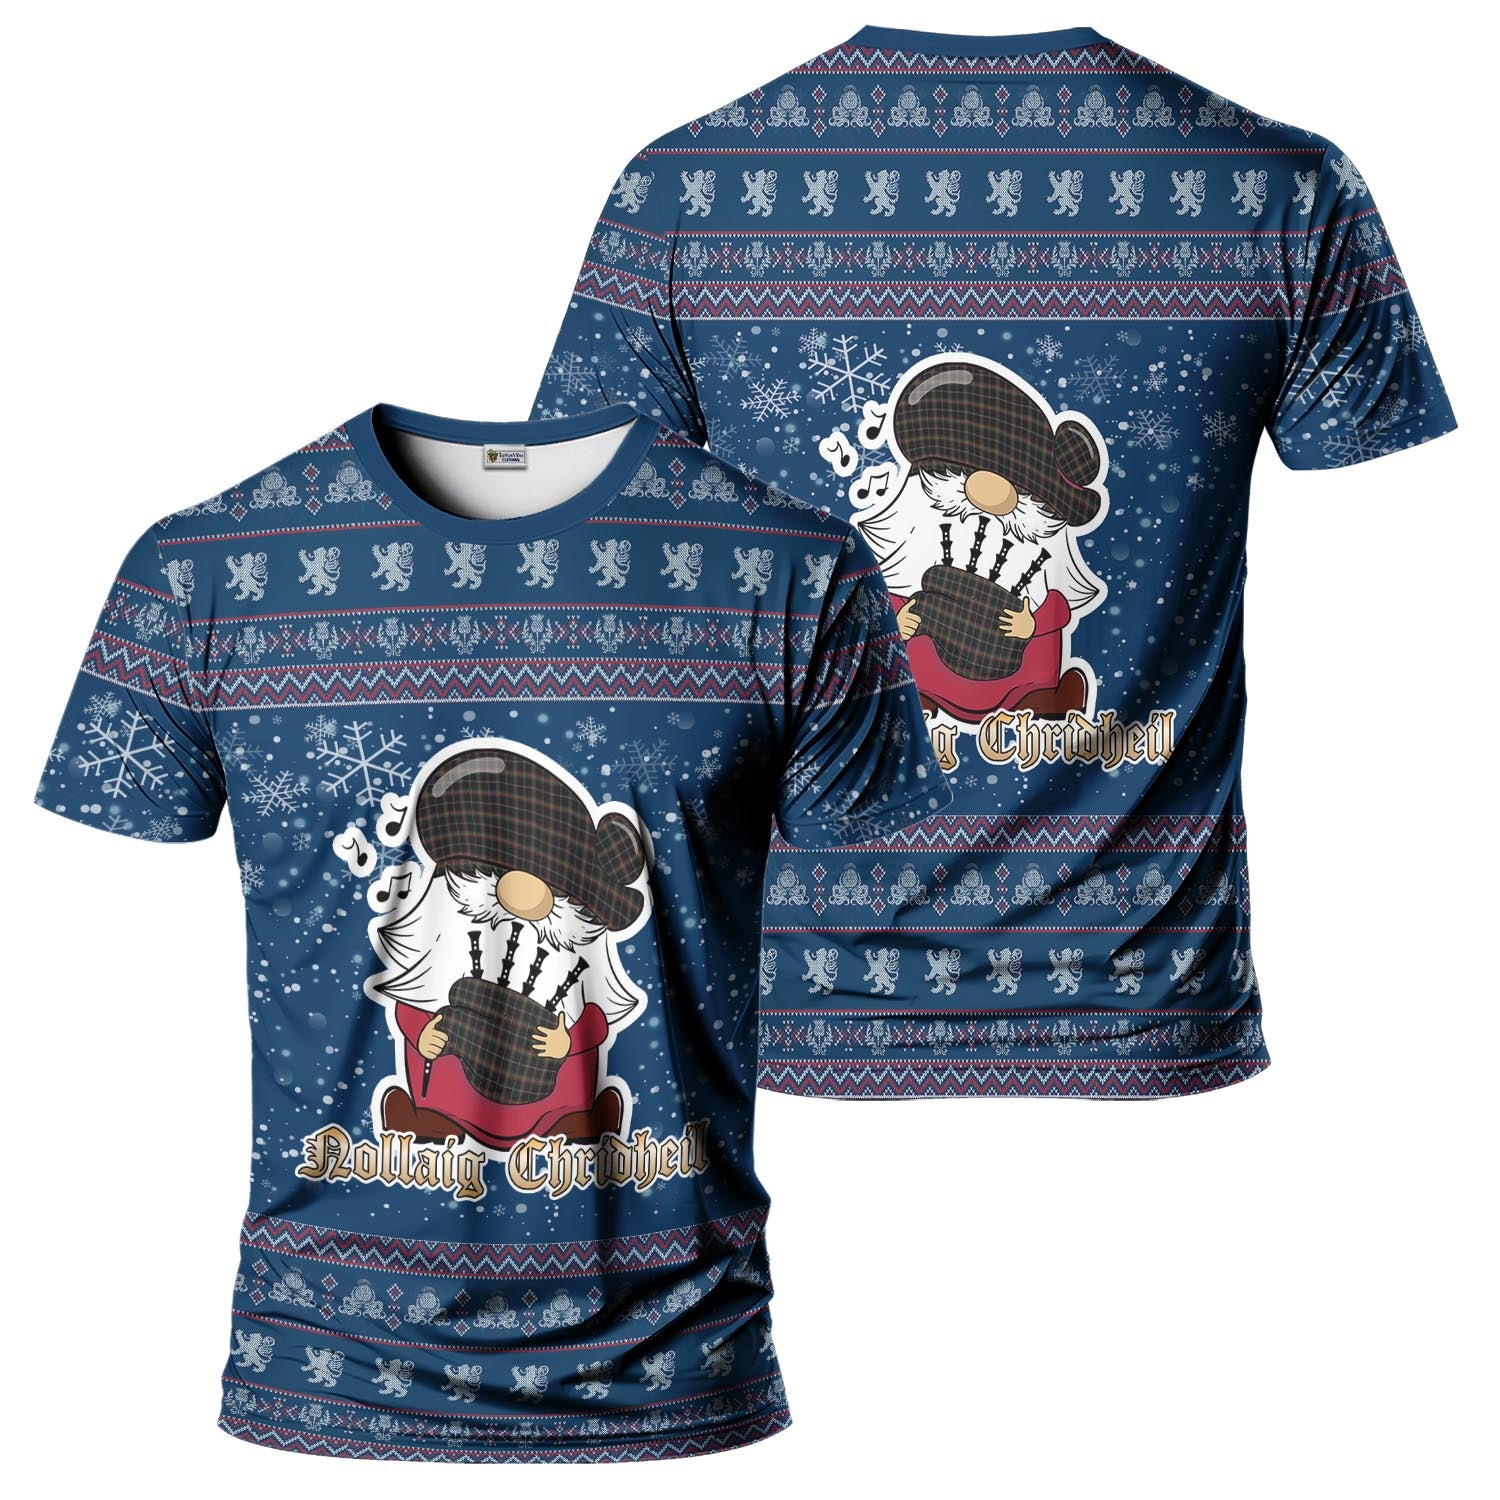 Stott Clan Christmas Family T-Shirt with Funny Gnome Playing Bagpipes Kid's Shirt Blue - Tartanvibesclothing